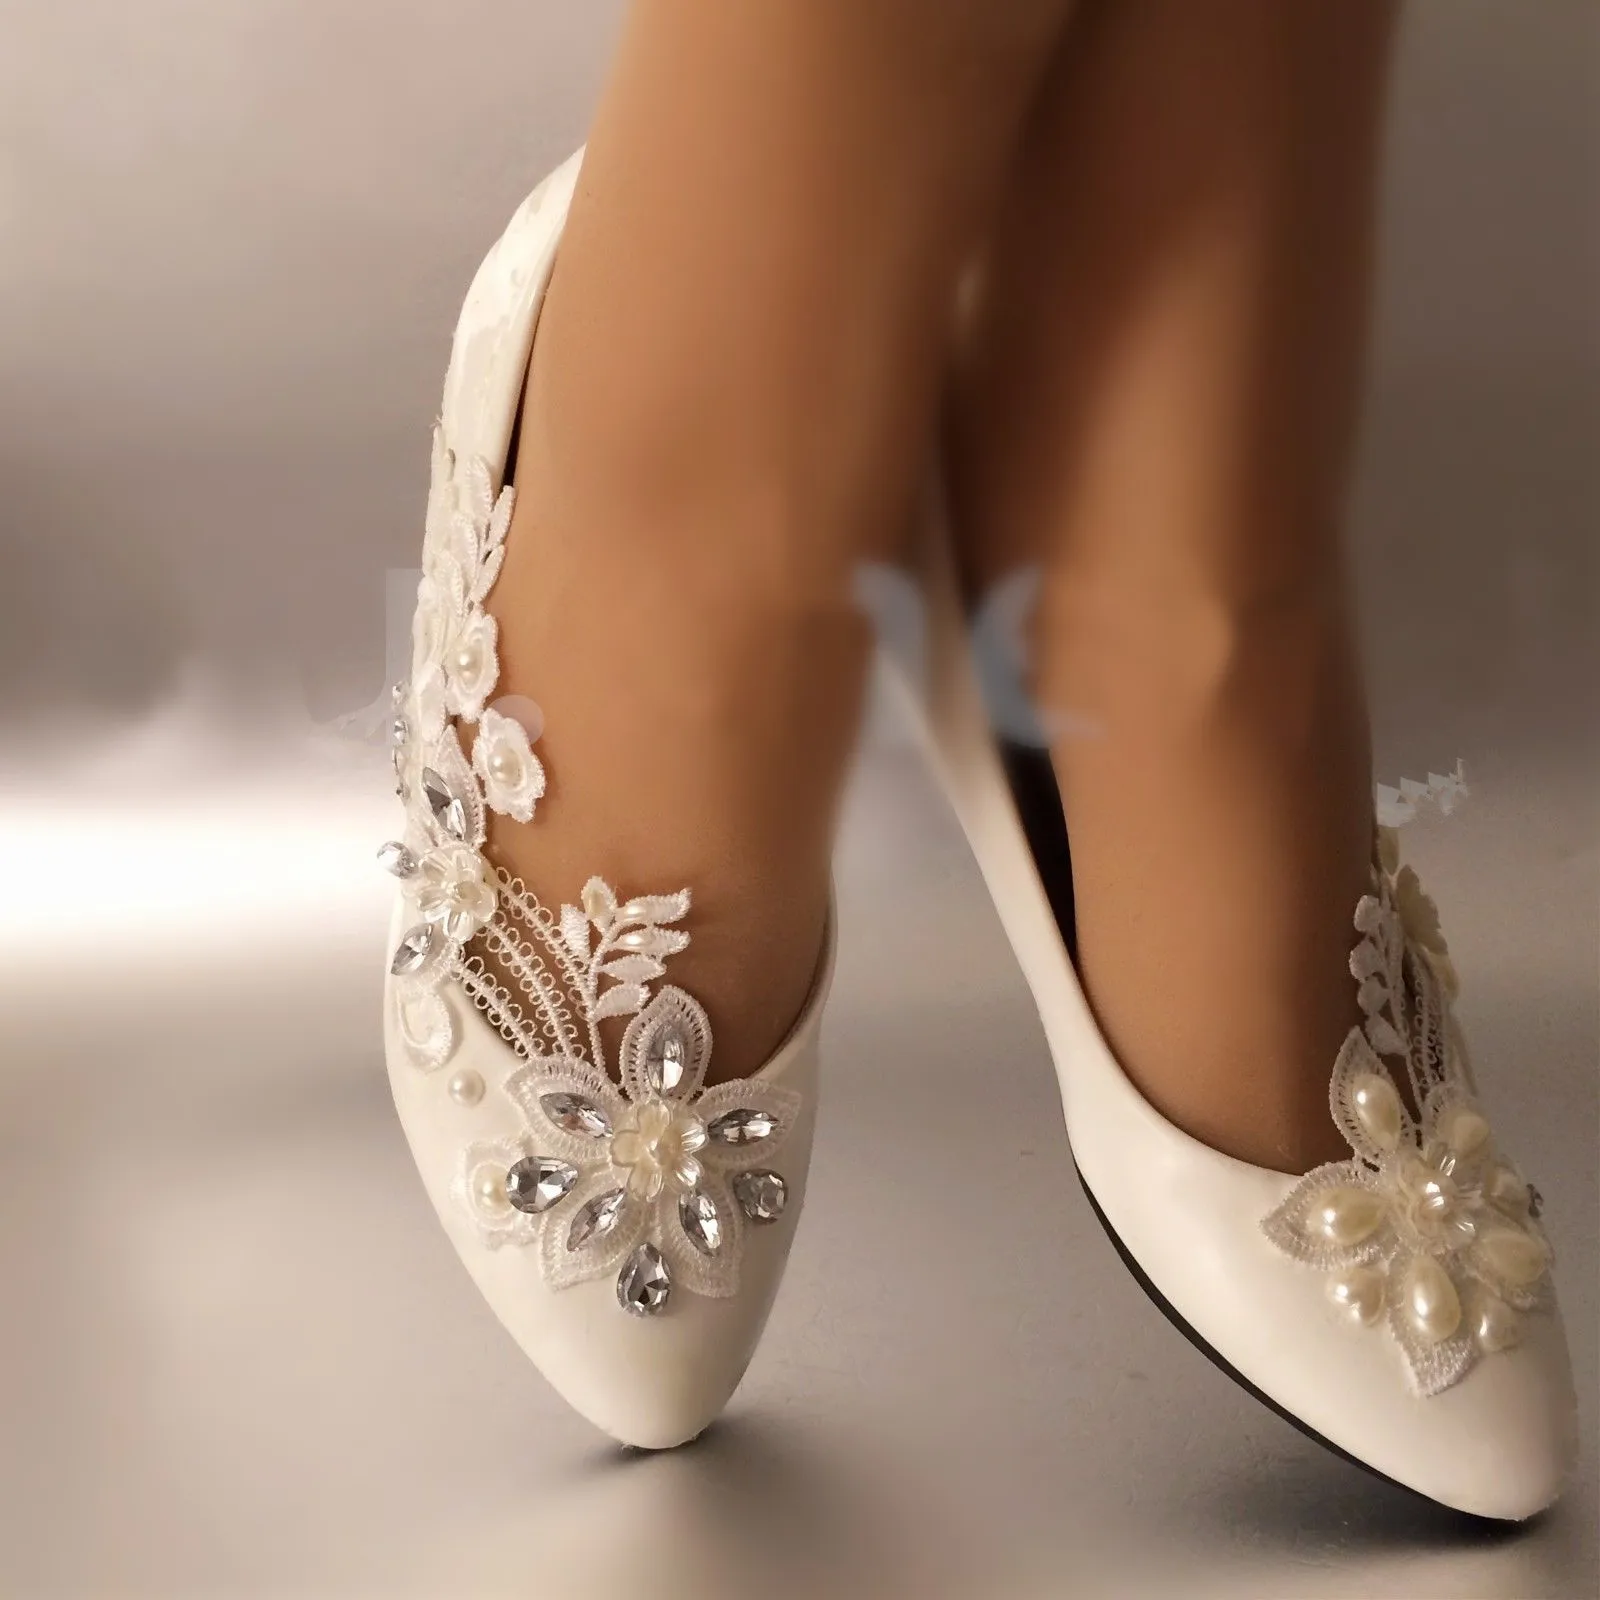 Lace wedding shoes Adult Flats Women Shoes Round Toe Spring and Autumn Summer Crystal size 41-42